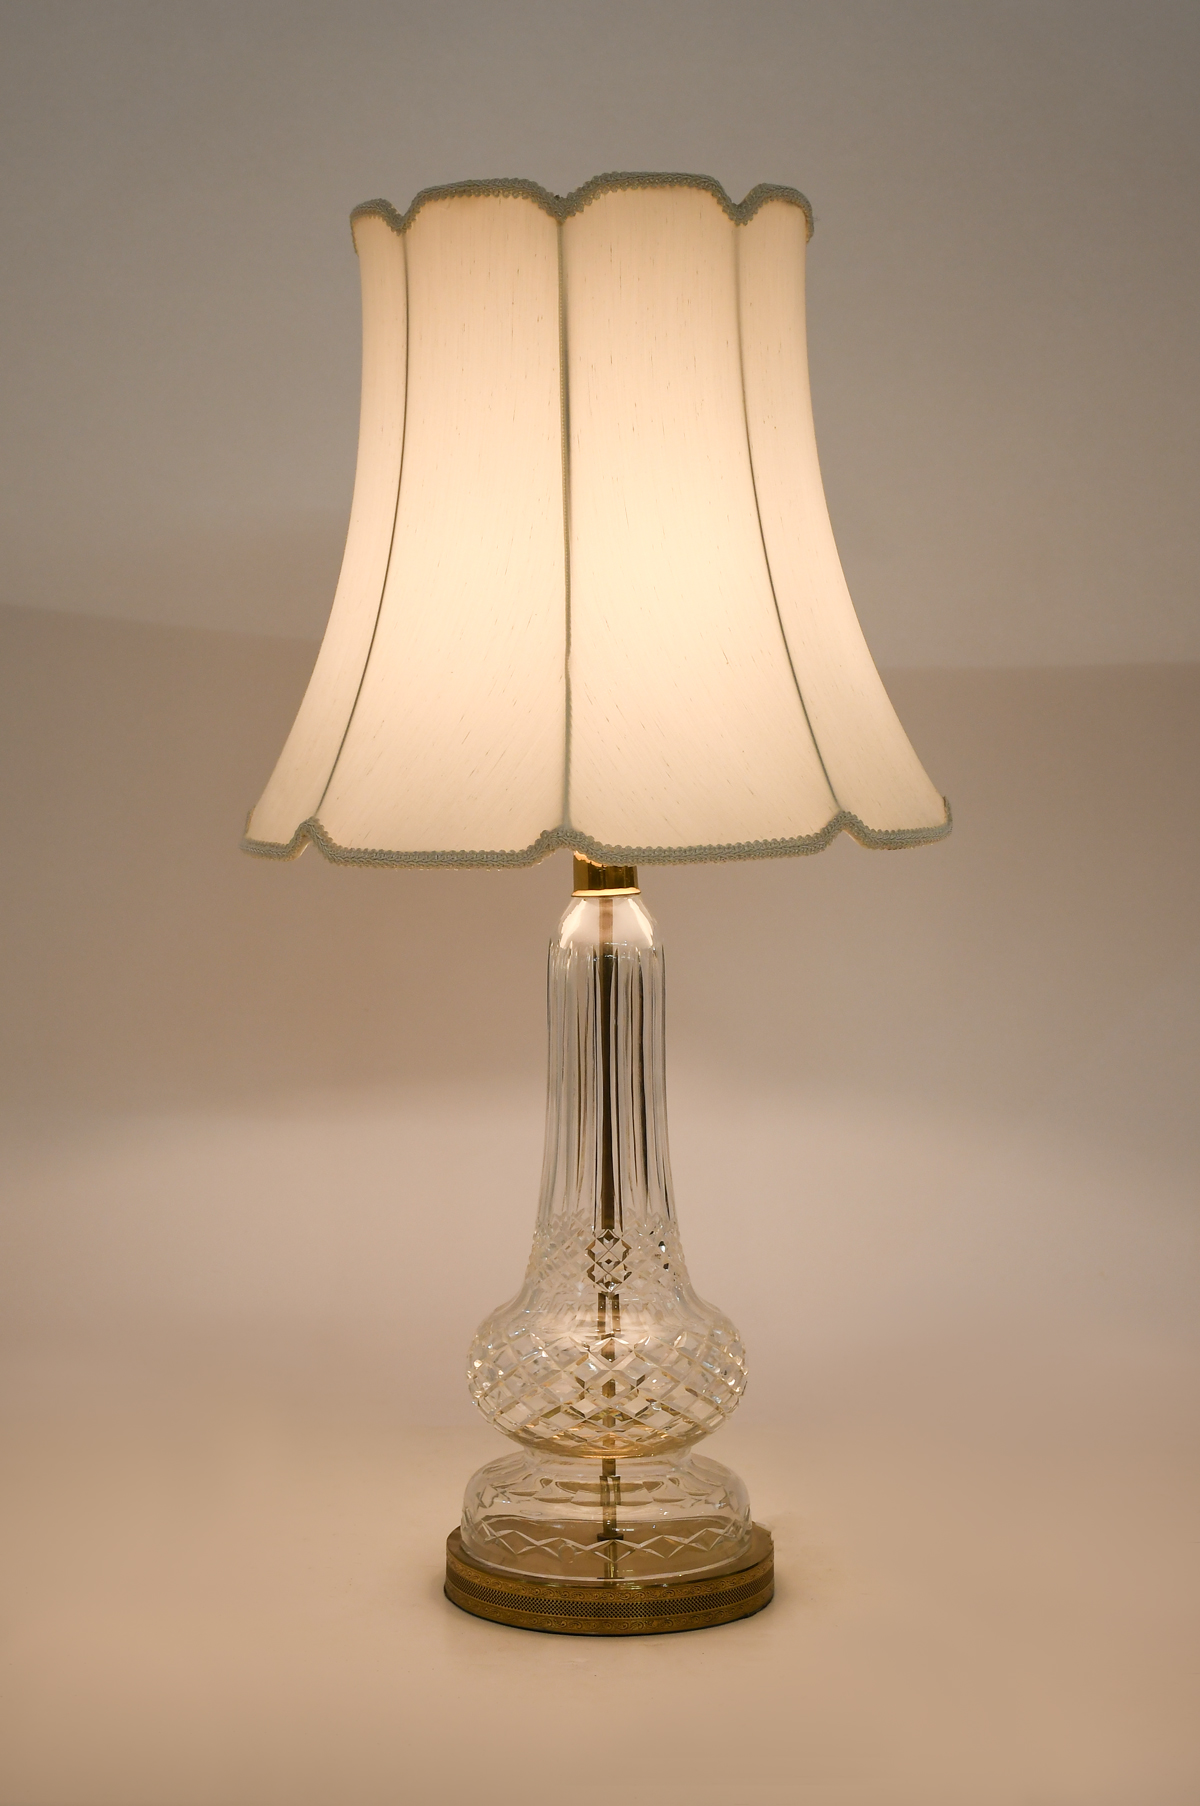 LARGE WATERFORD CRYSTAL TABLE LAMP  2764ee